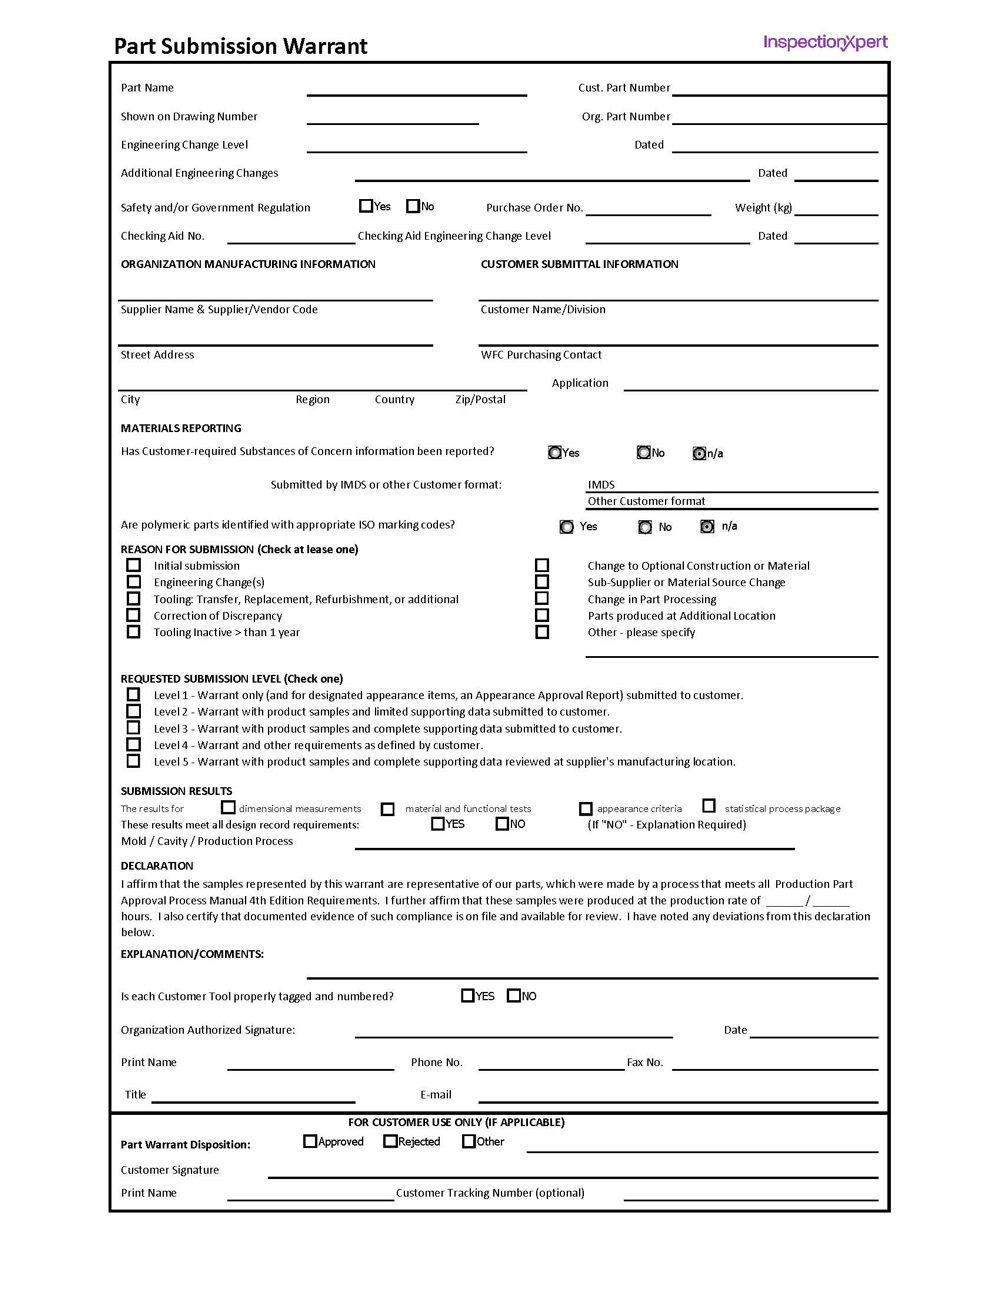 Part Submission Warrant (PSW) Template